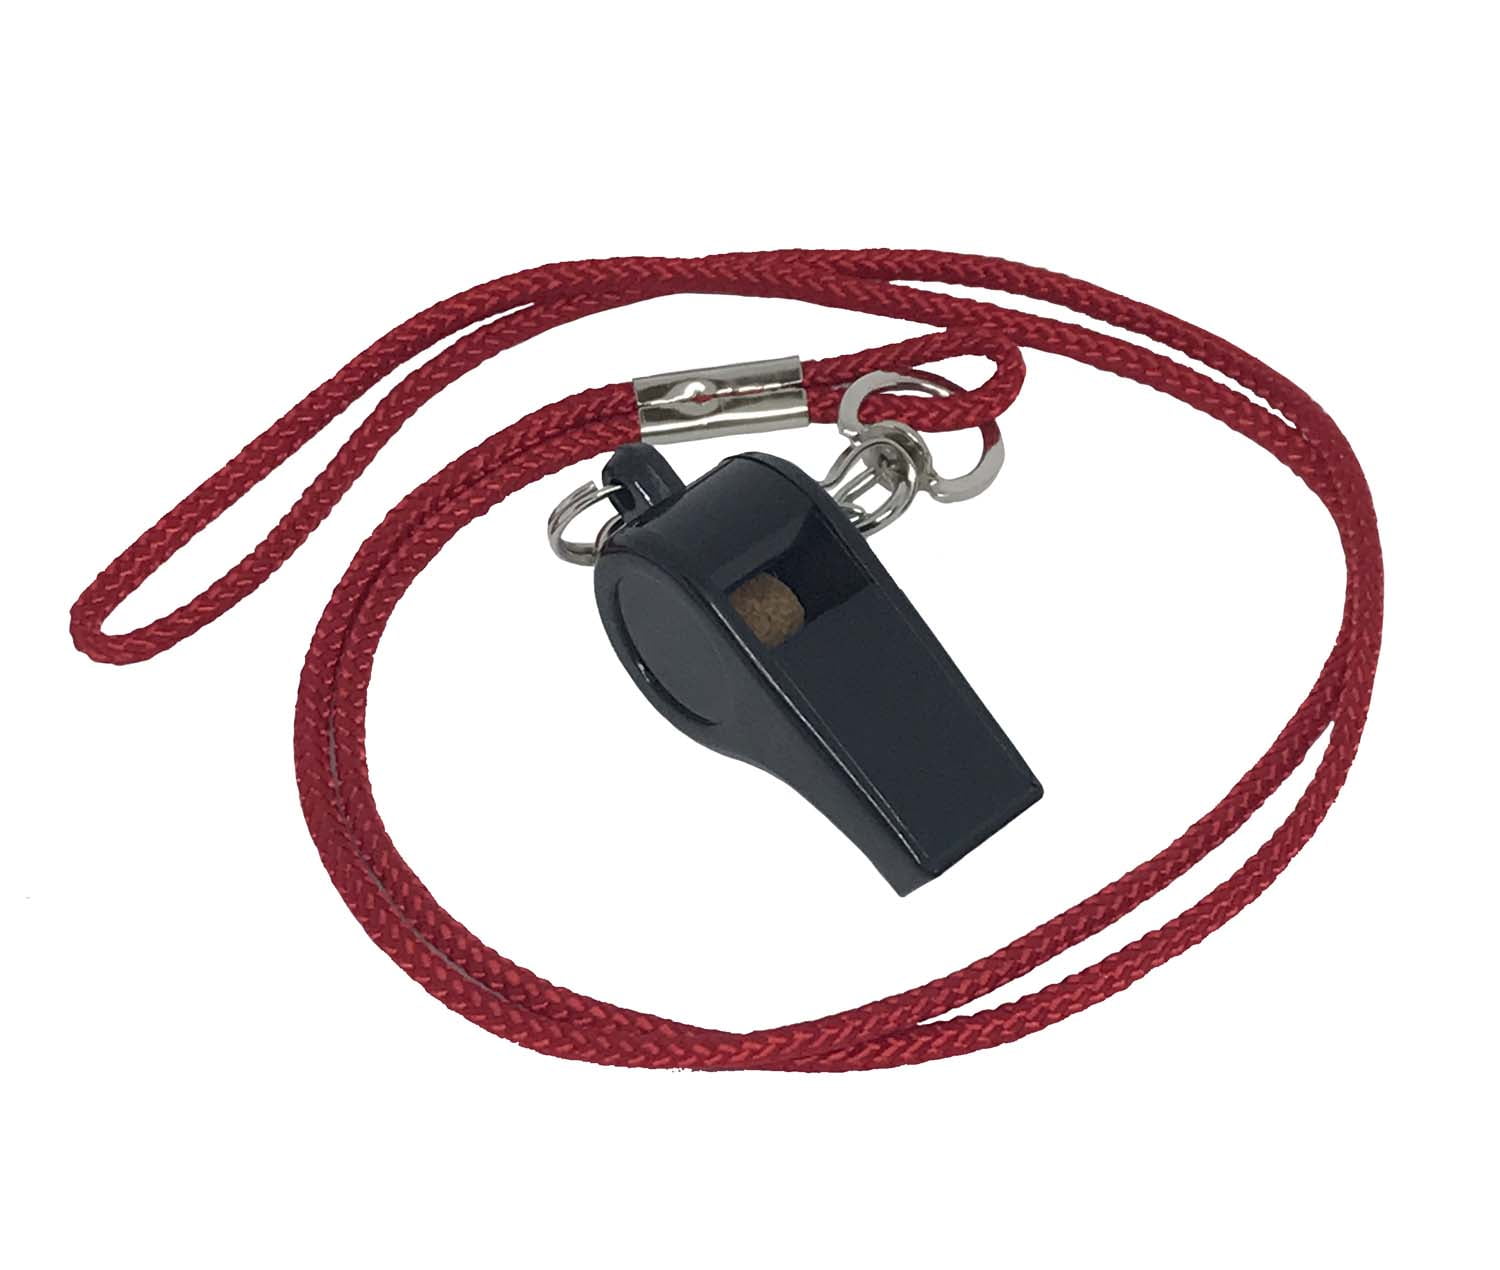 & Teachers Cannon Sports Metal Whistle with Lanyard for Referees Coaches 